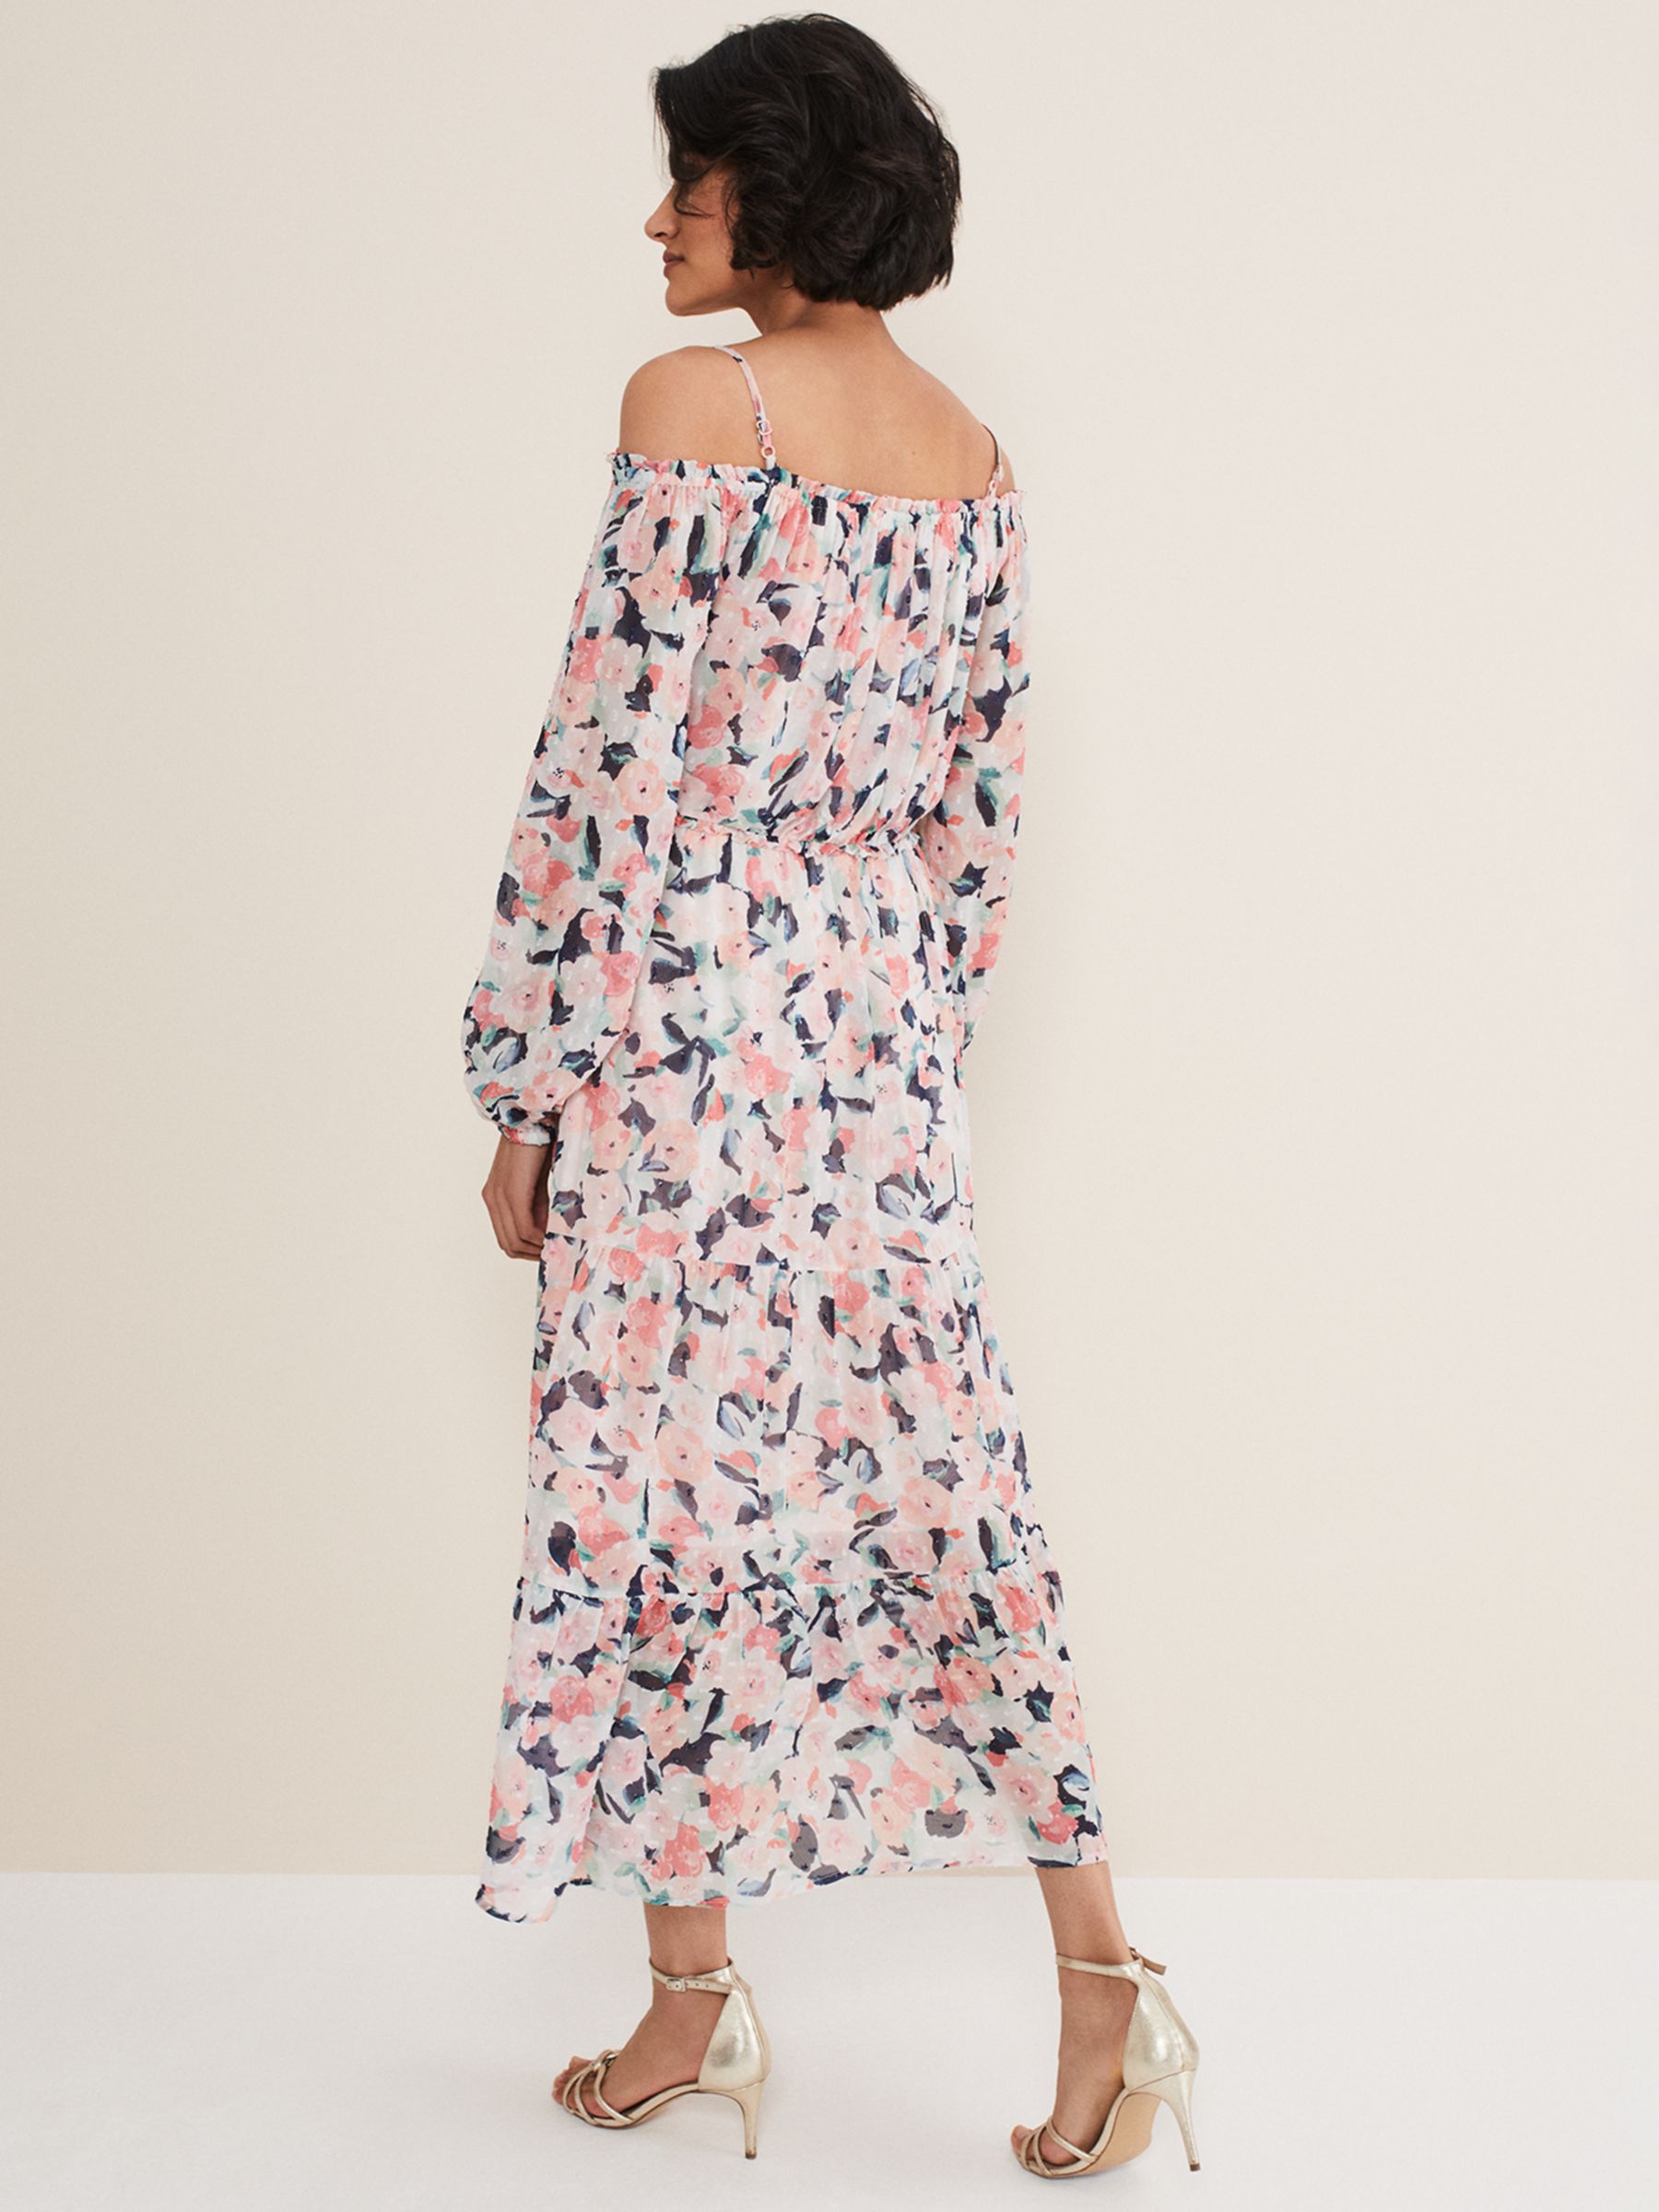 Phase Eight Vicky Off Shoulder Floral Midi Dress, Multi, 6